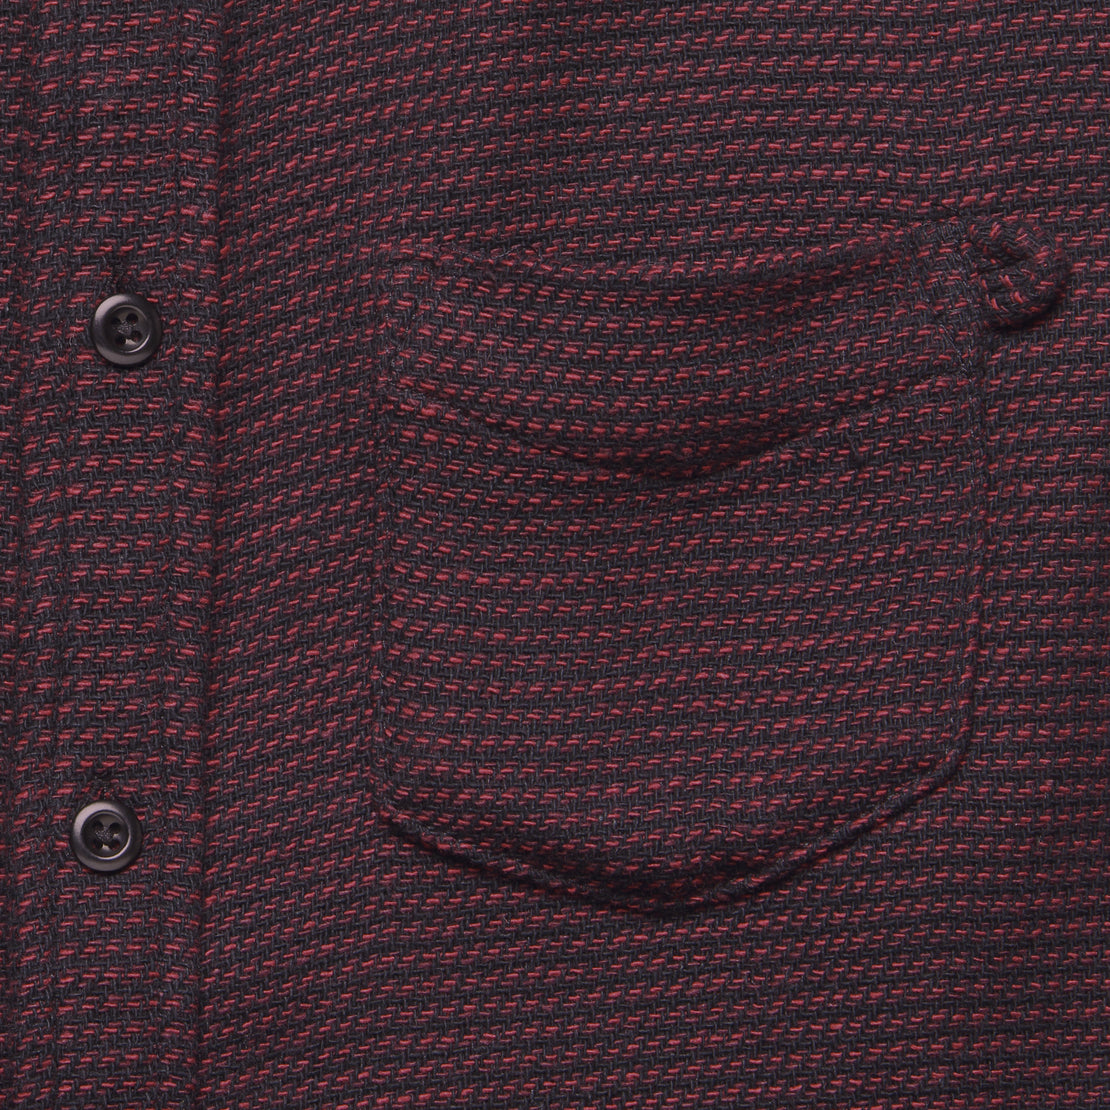 Archer Overshirt - Oxblood - Life After Denim - STAG Provisions - Tops - L/S Woven - Overshirt